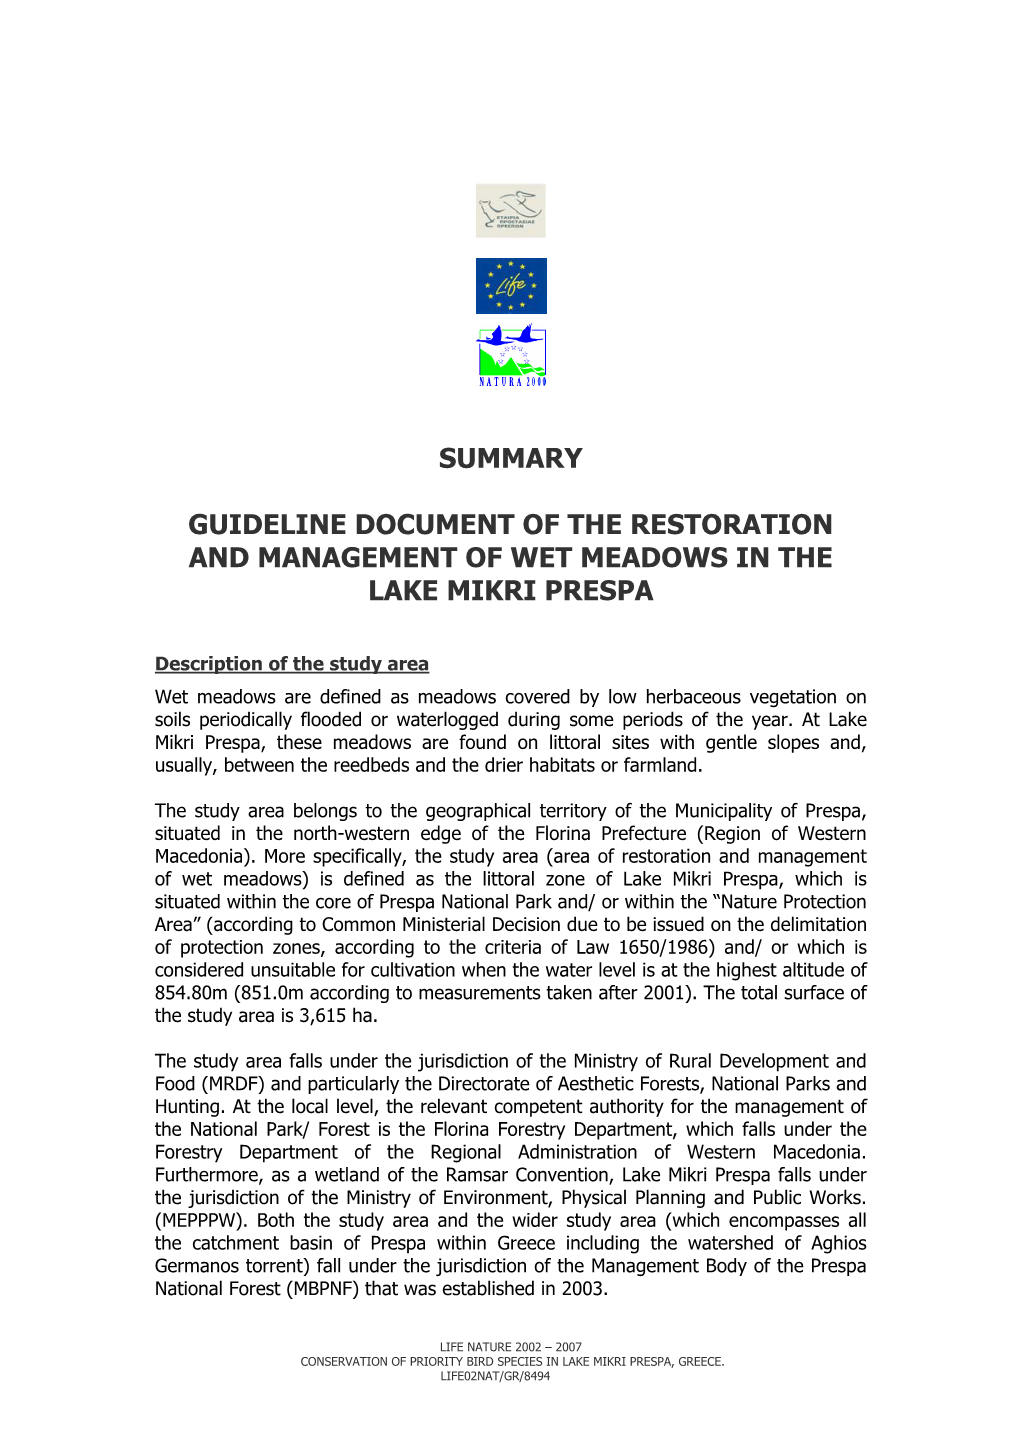 Guideline Document of the Restoration and Management of Wet Meadows in the Lake Mikri Prespa